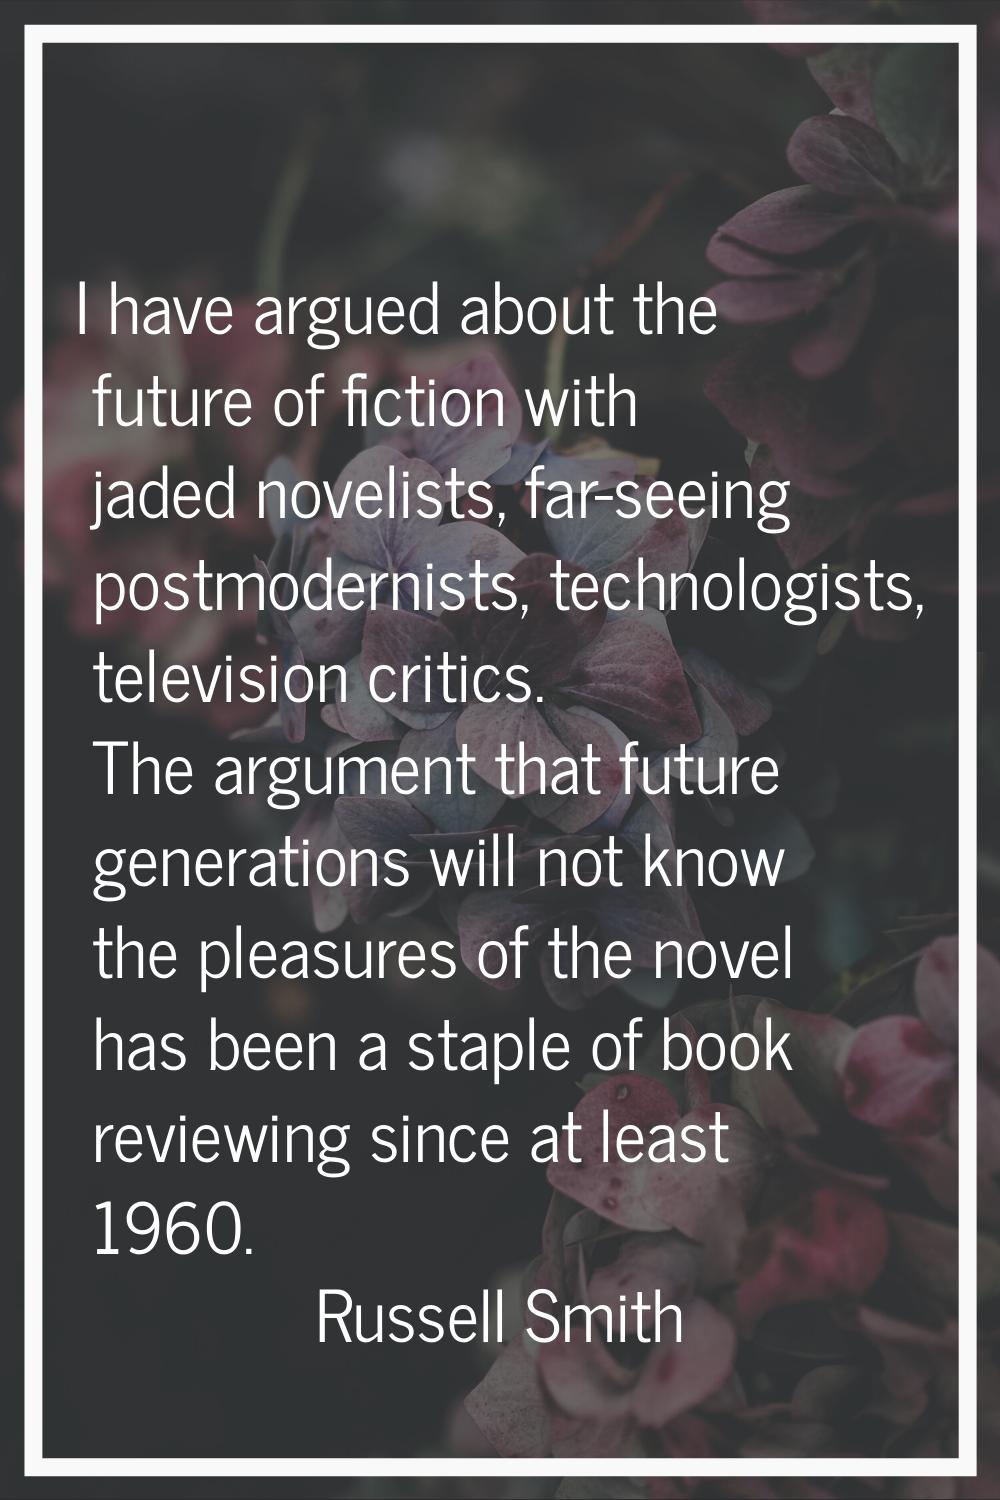 I have argued about the future of fiction with jaded novelists, far-seeing postmodernists, technolo